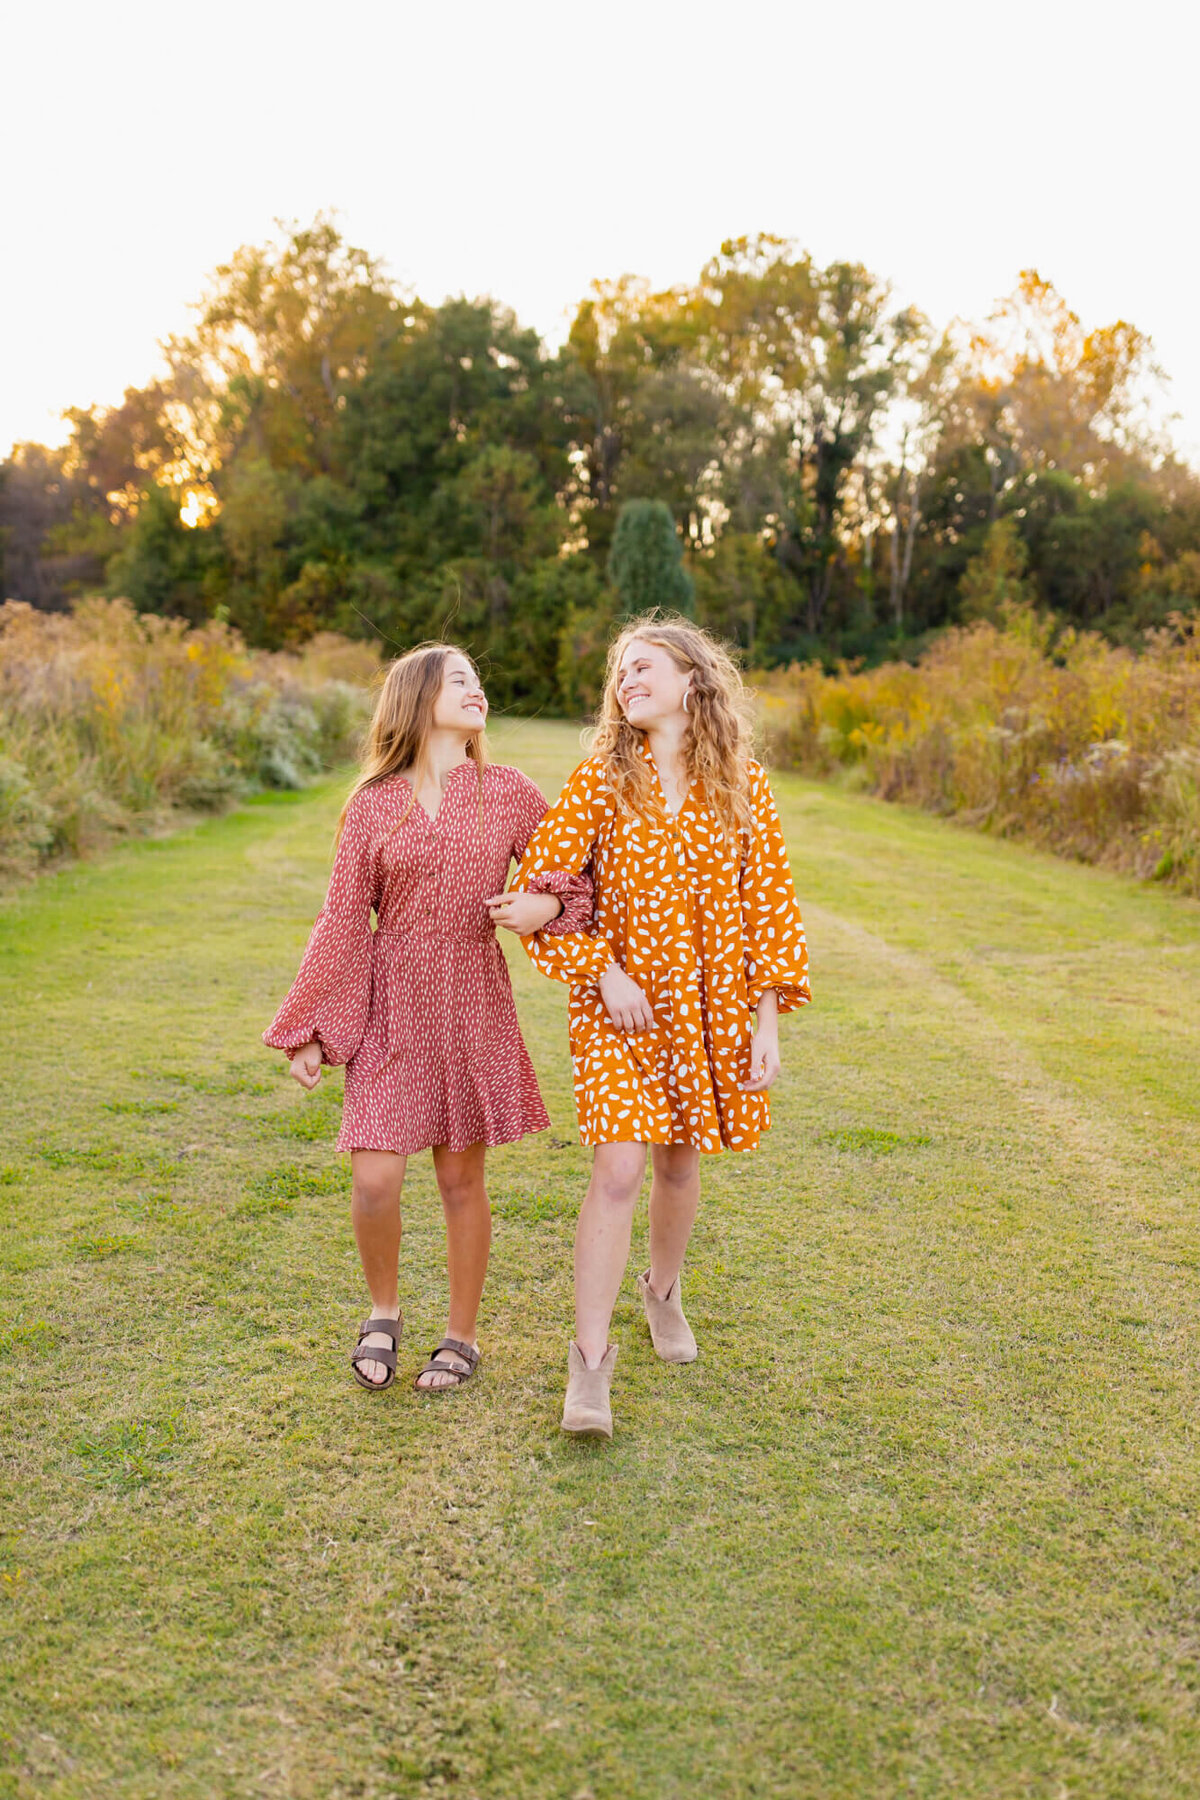 Two sisters skip arm in arm through the grass